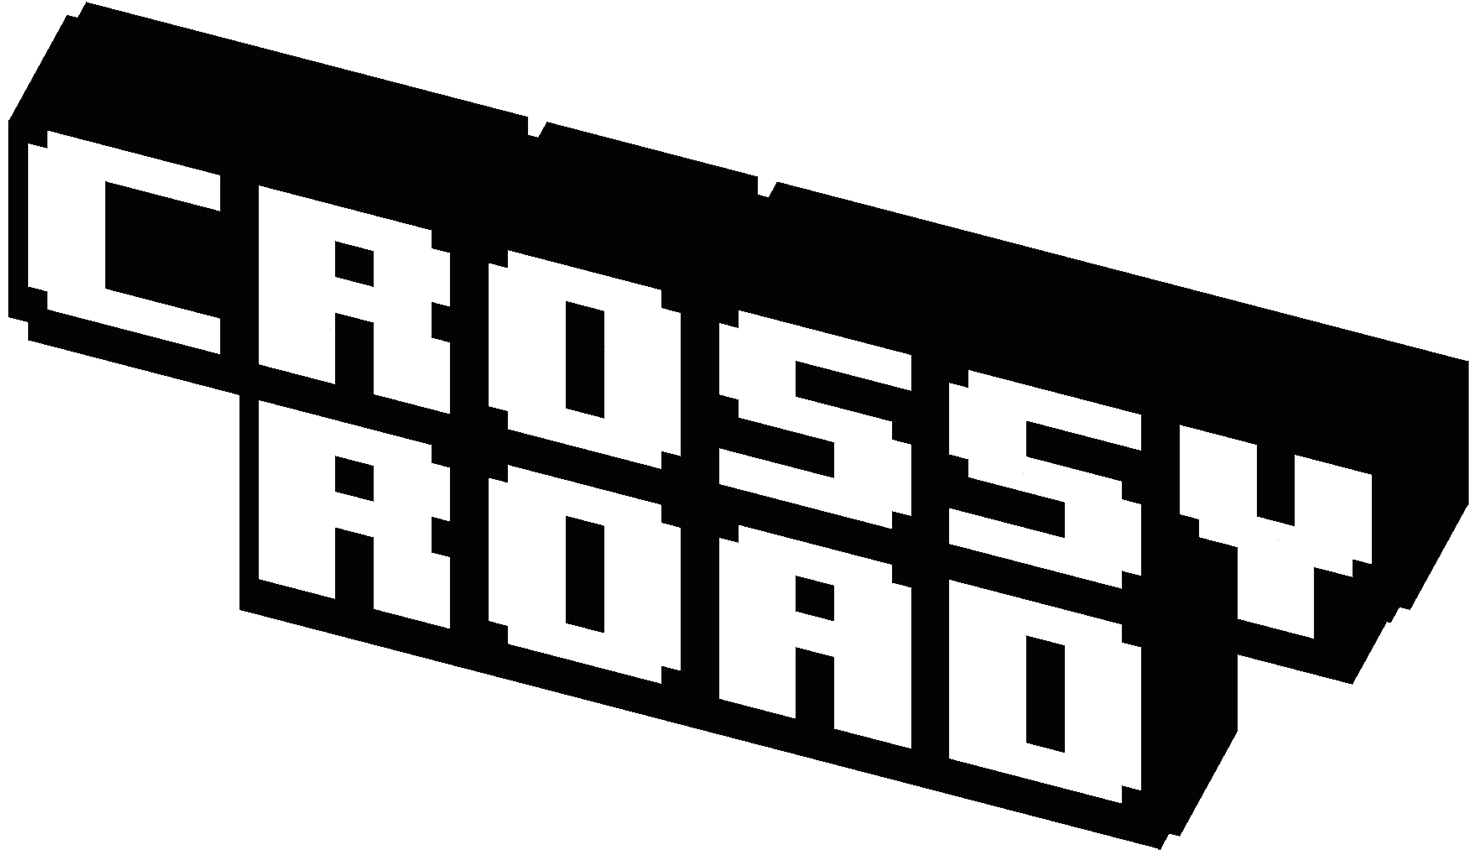 Crossy Road' Review – Watch Out for That Train! – TouchArcade